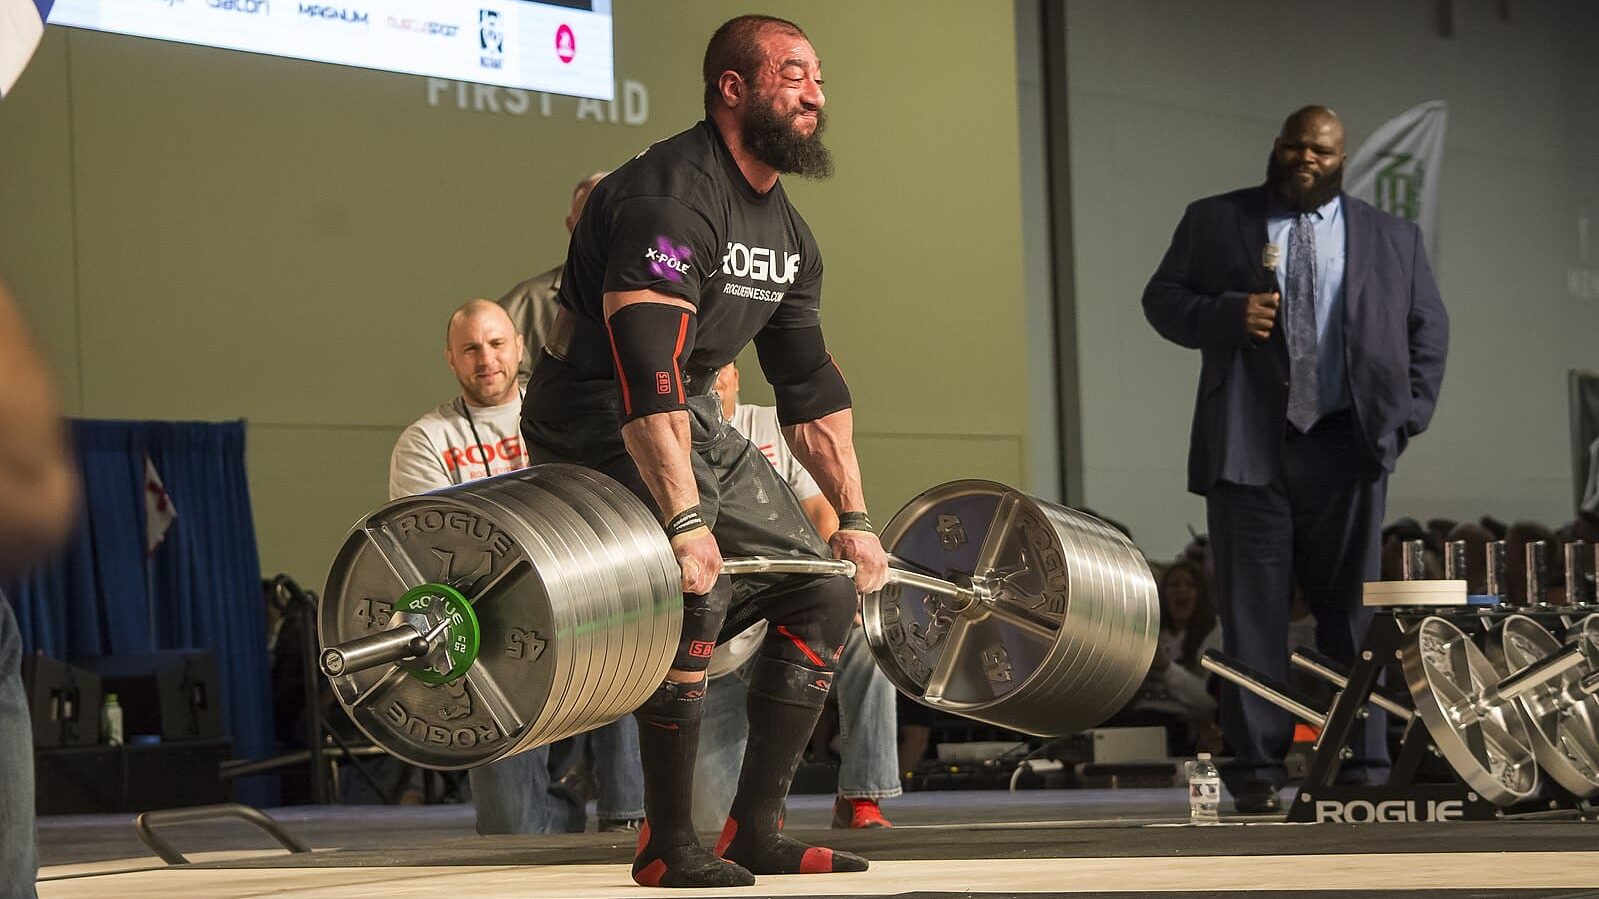 zach hadge performing a strongman style deadlift with the rogue elephant bar